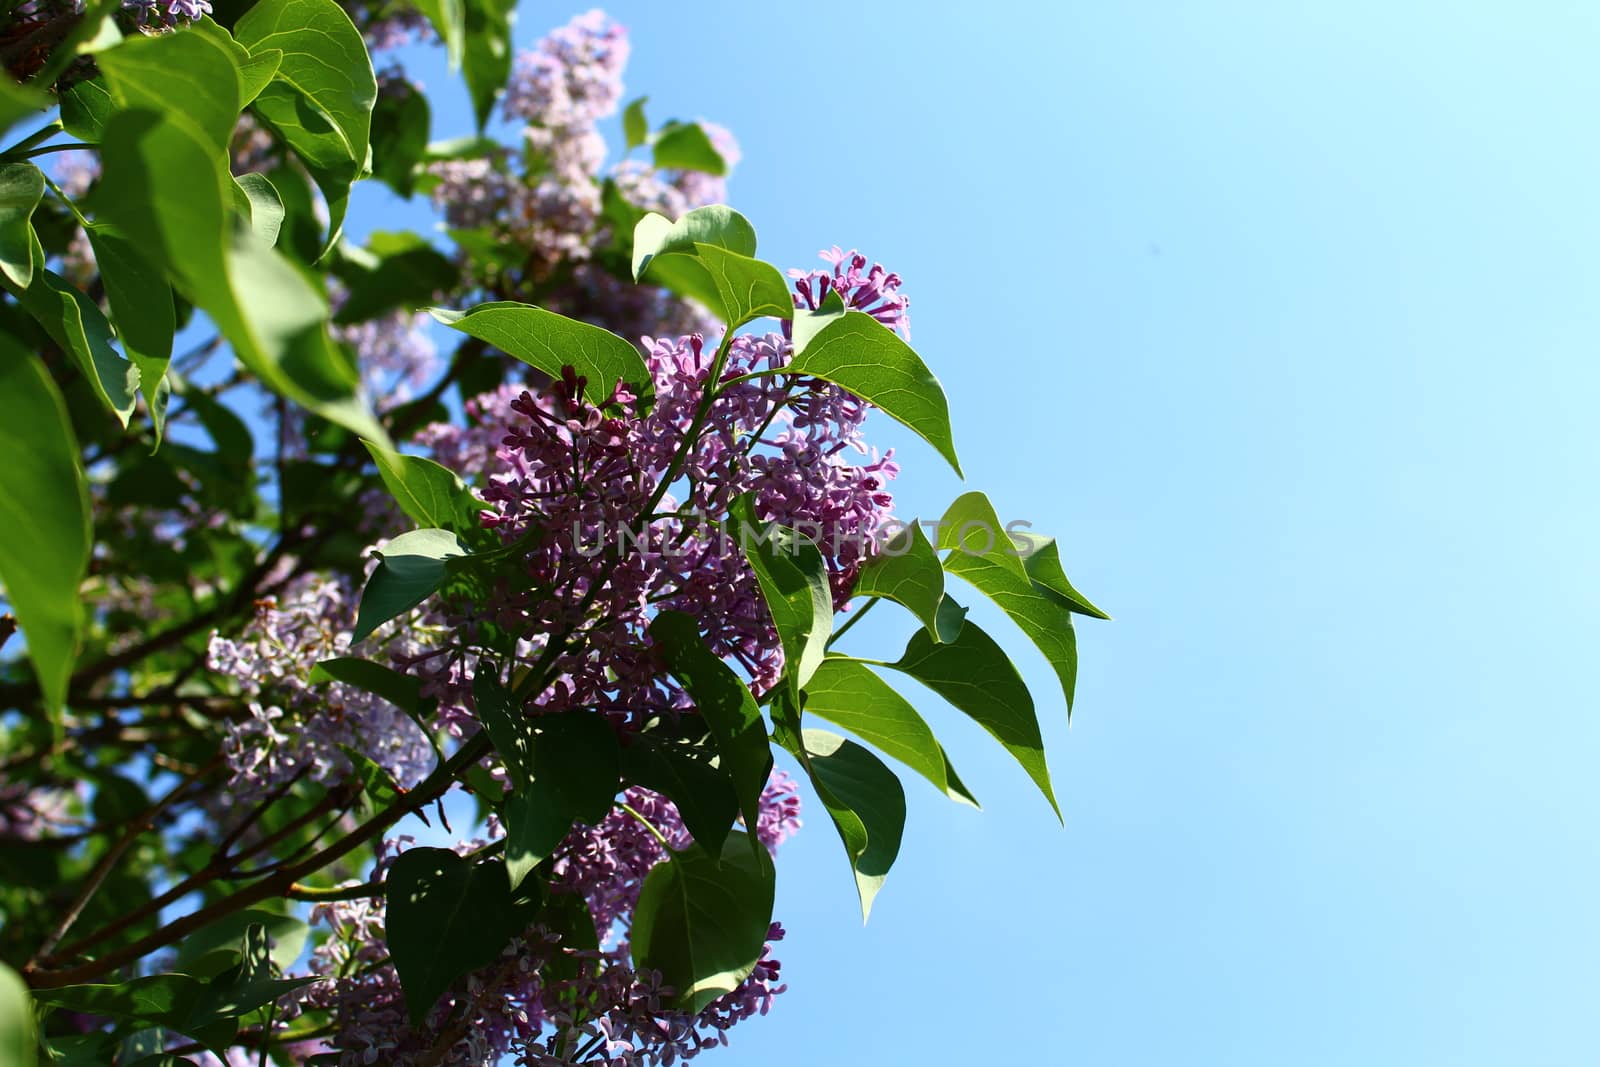 The pictureshows beautiful lilac in the garden.